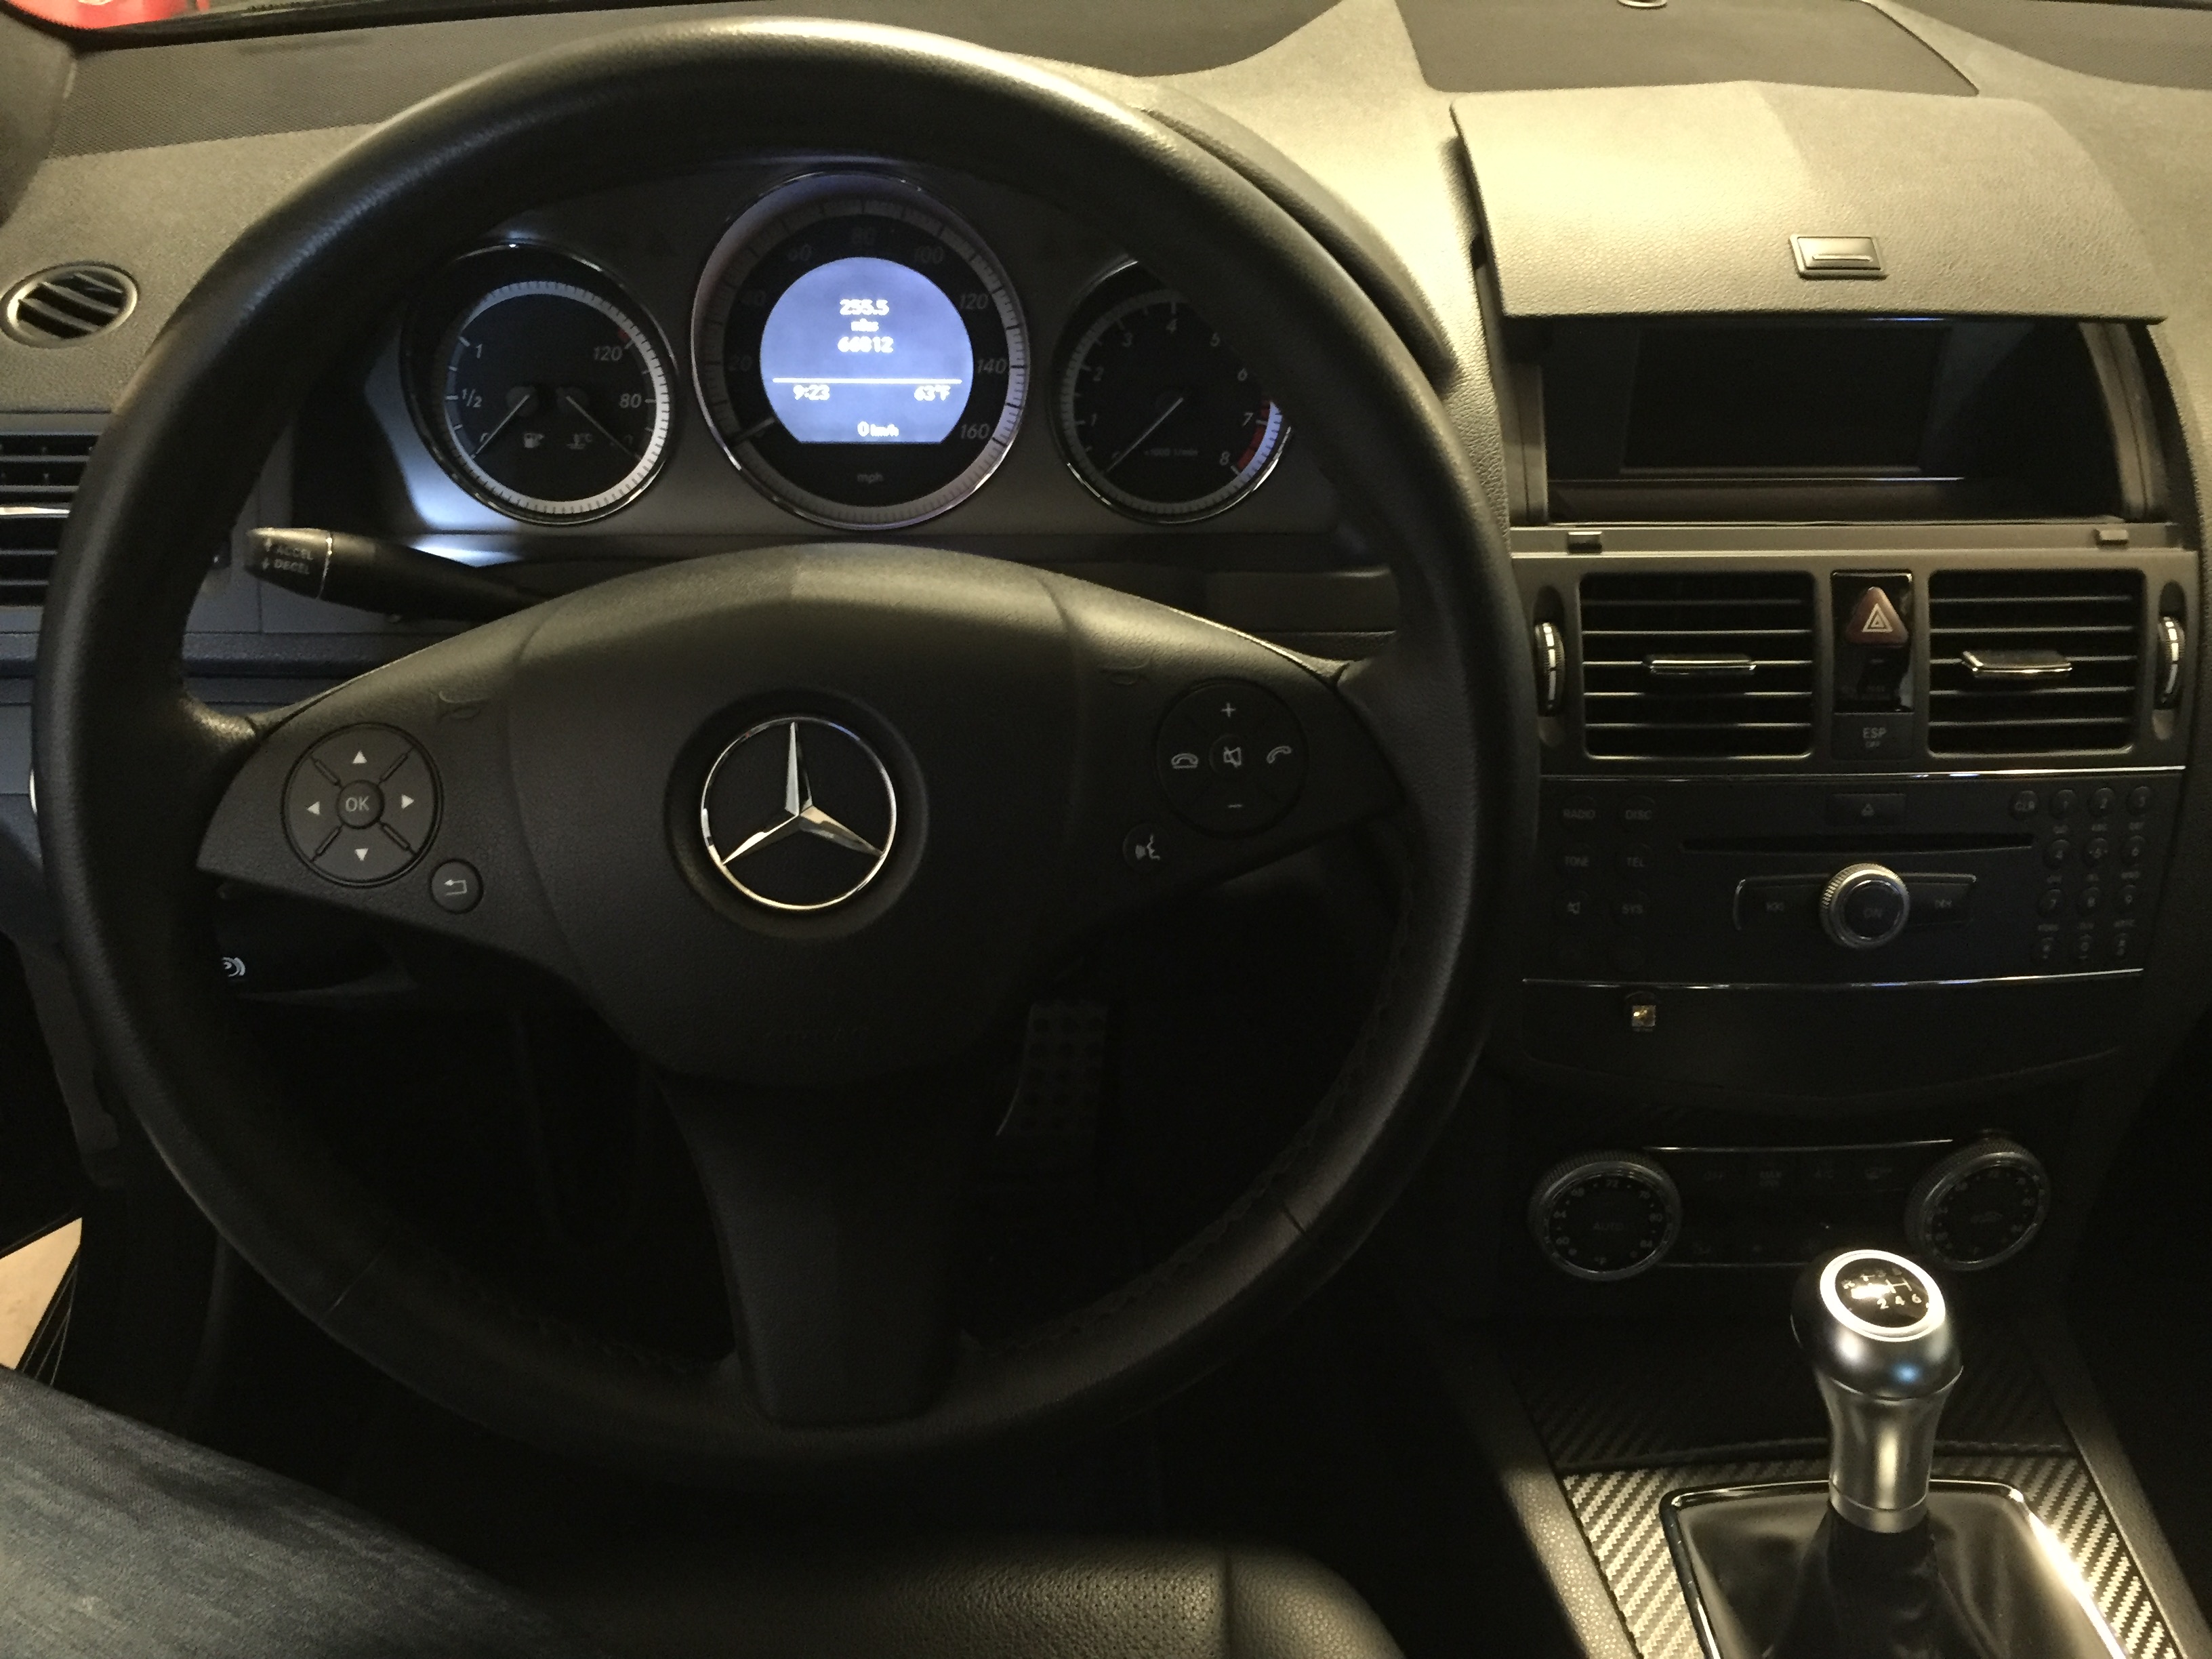 Searching for the best usa mercedes dealership near you involves a little effort, time, and research. FS: 2009 Mercedes Benz C300 W204 Black on Black Manual